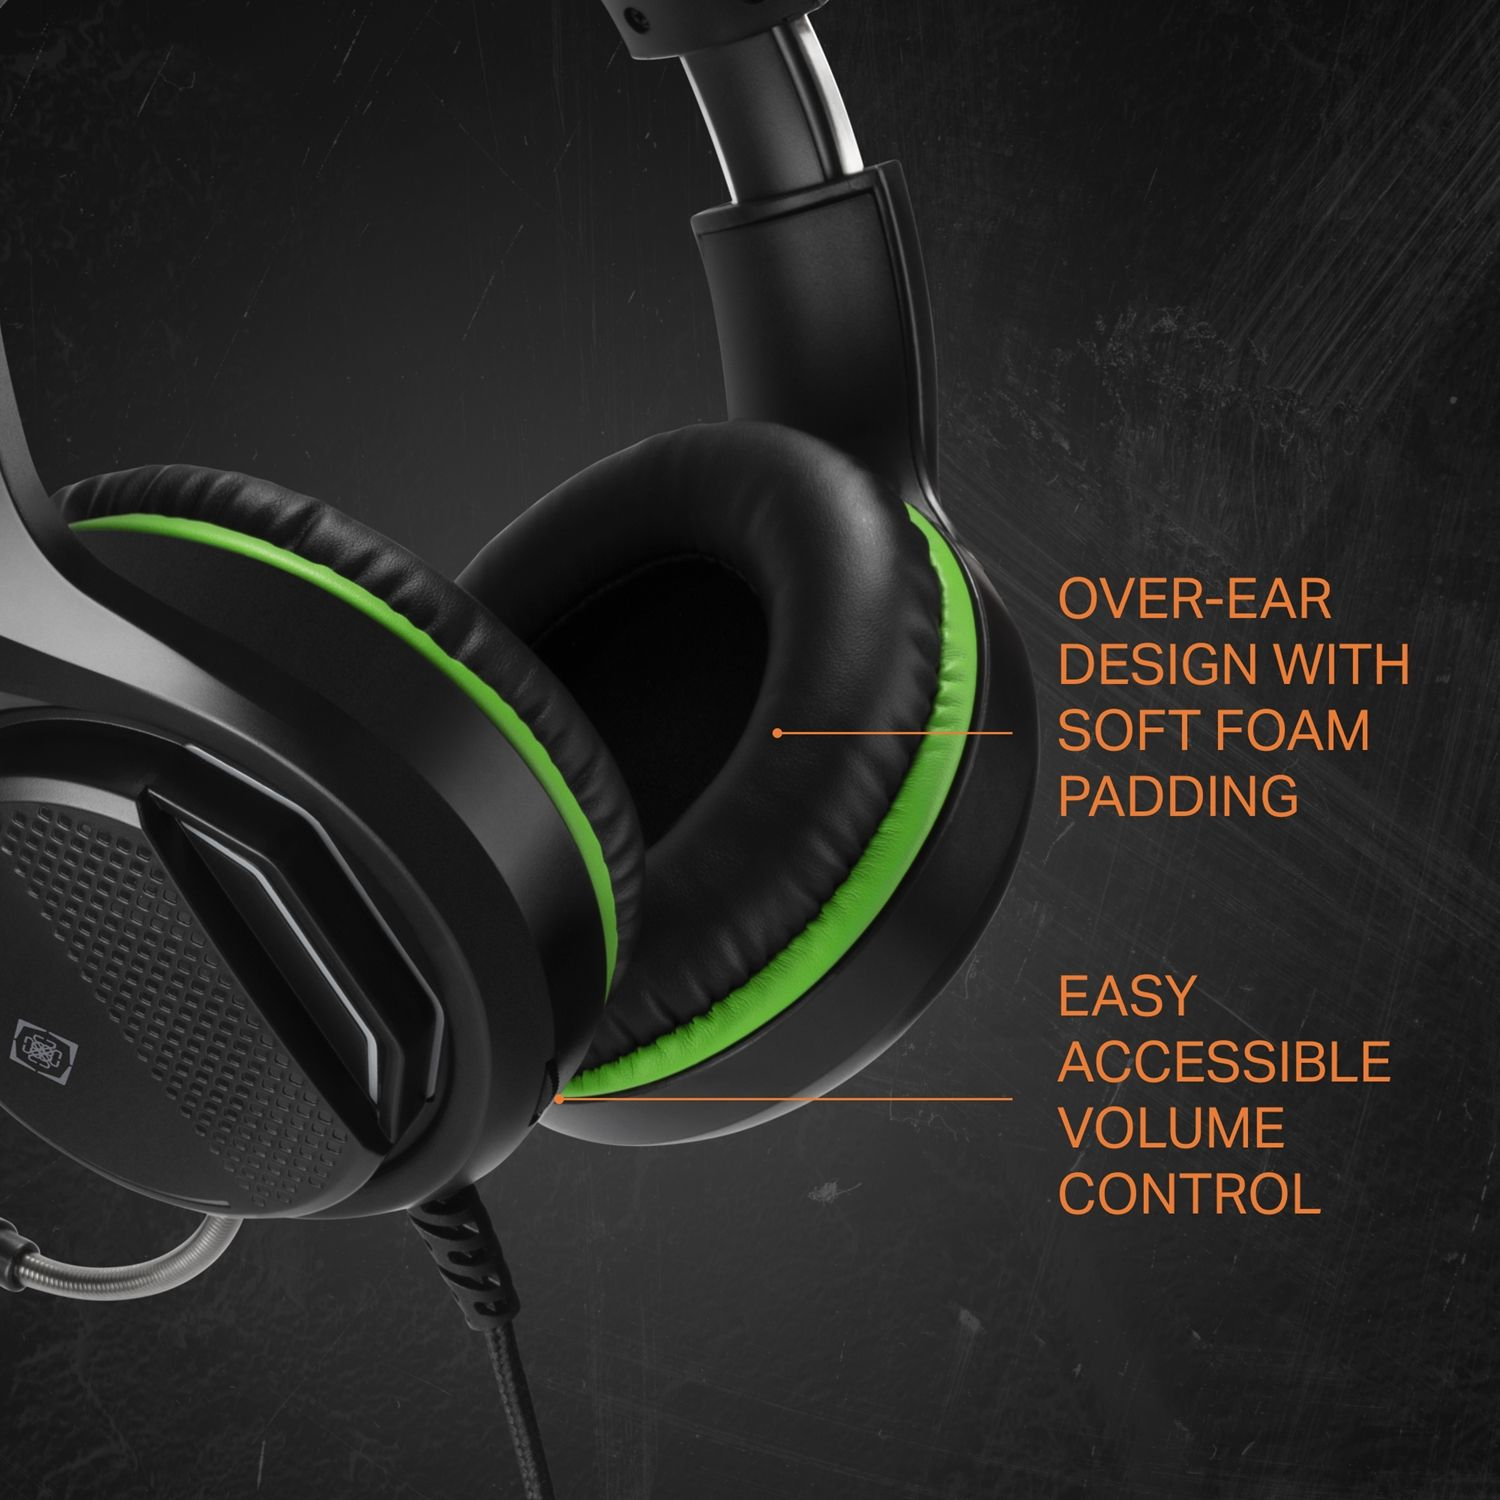 DELTACO GAMING Stereo Gaming Headset S/X, schwarz für On-ear Headset XBox One